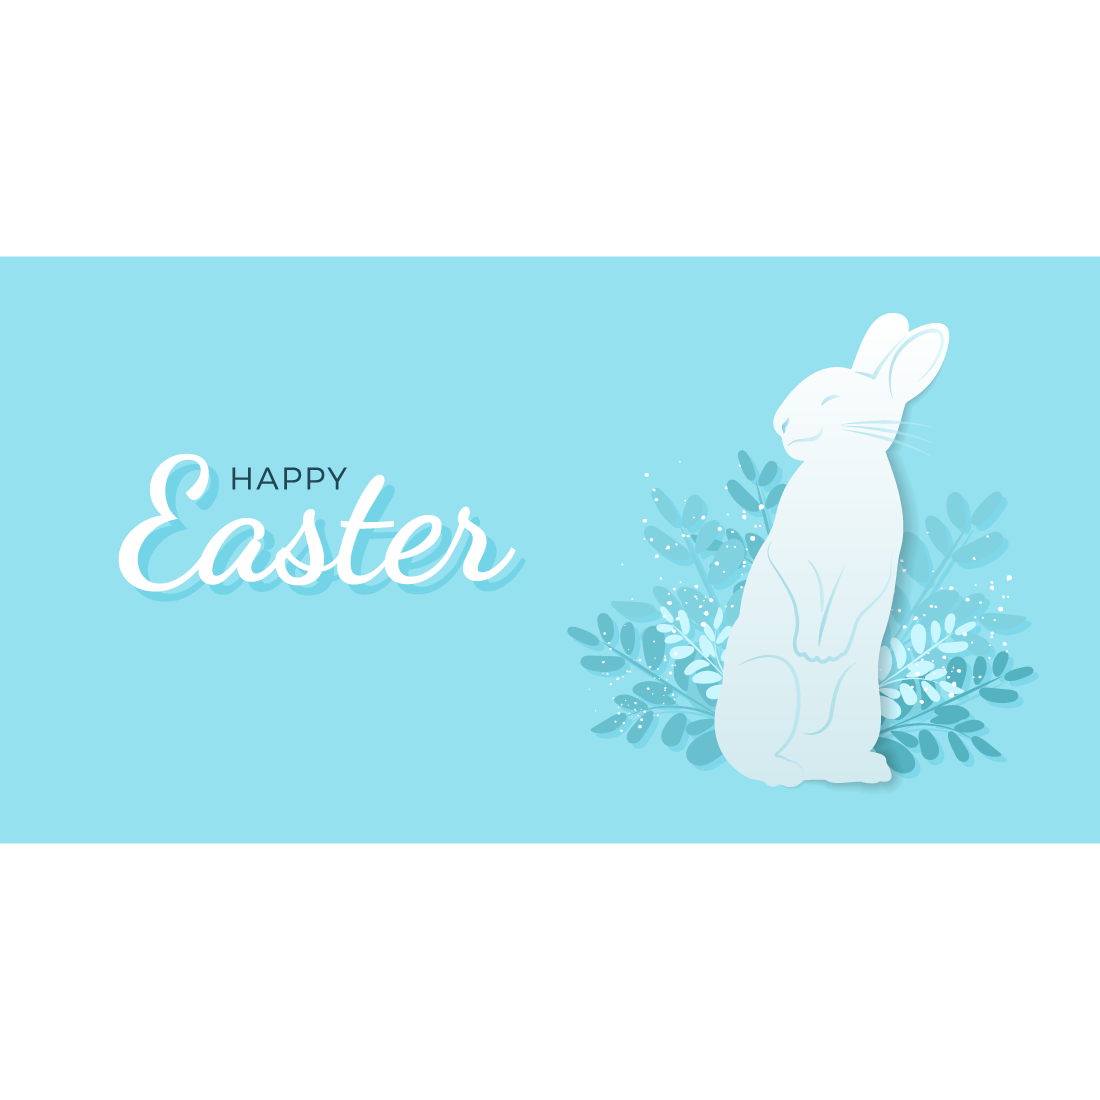 Happy Easter vector banners with Easter egg, bunny, flowers and herb preview image.